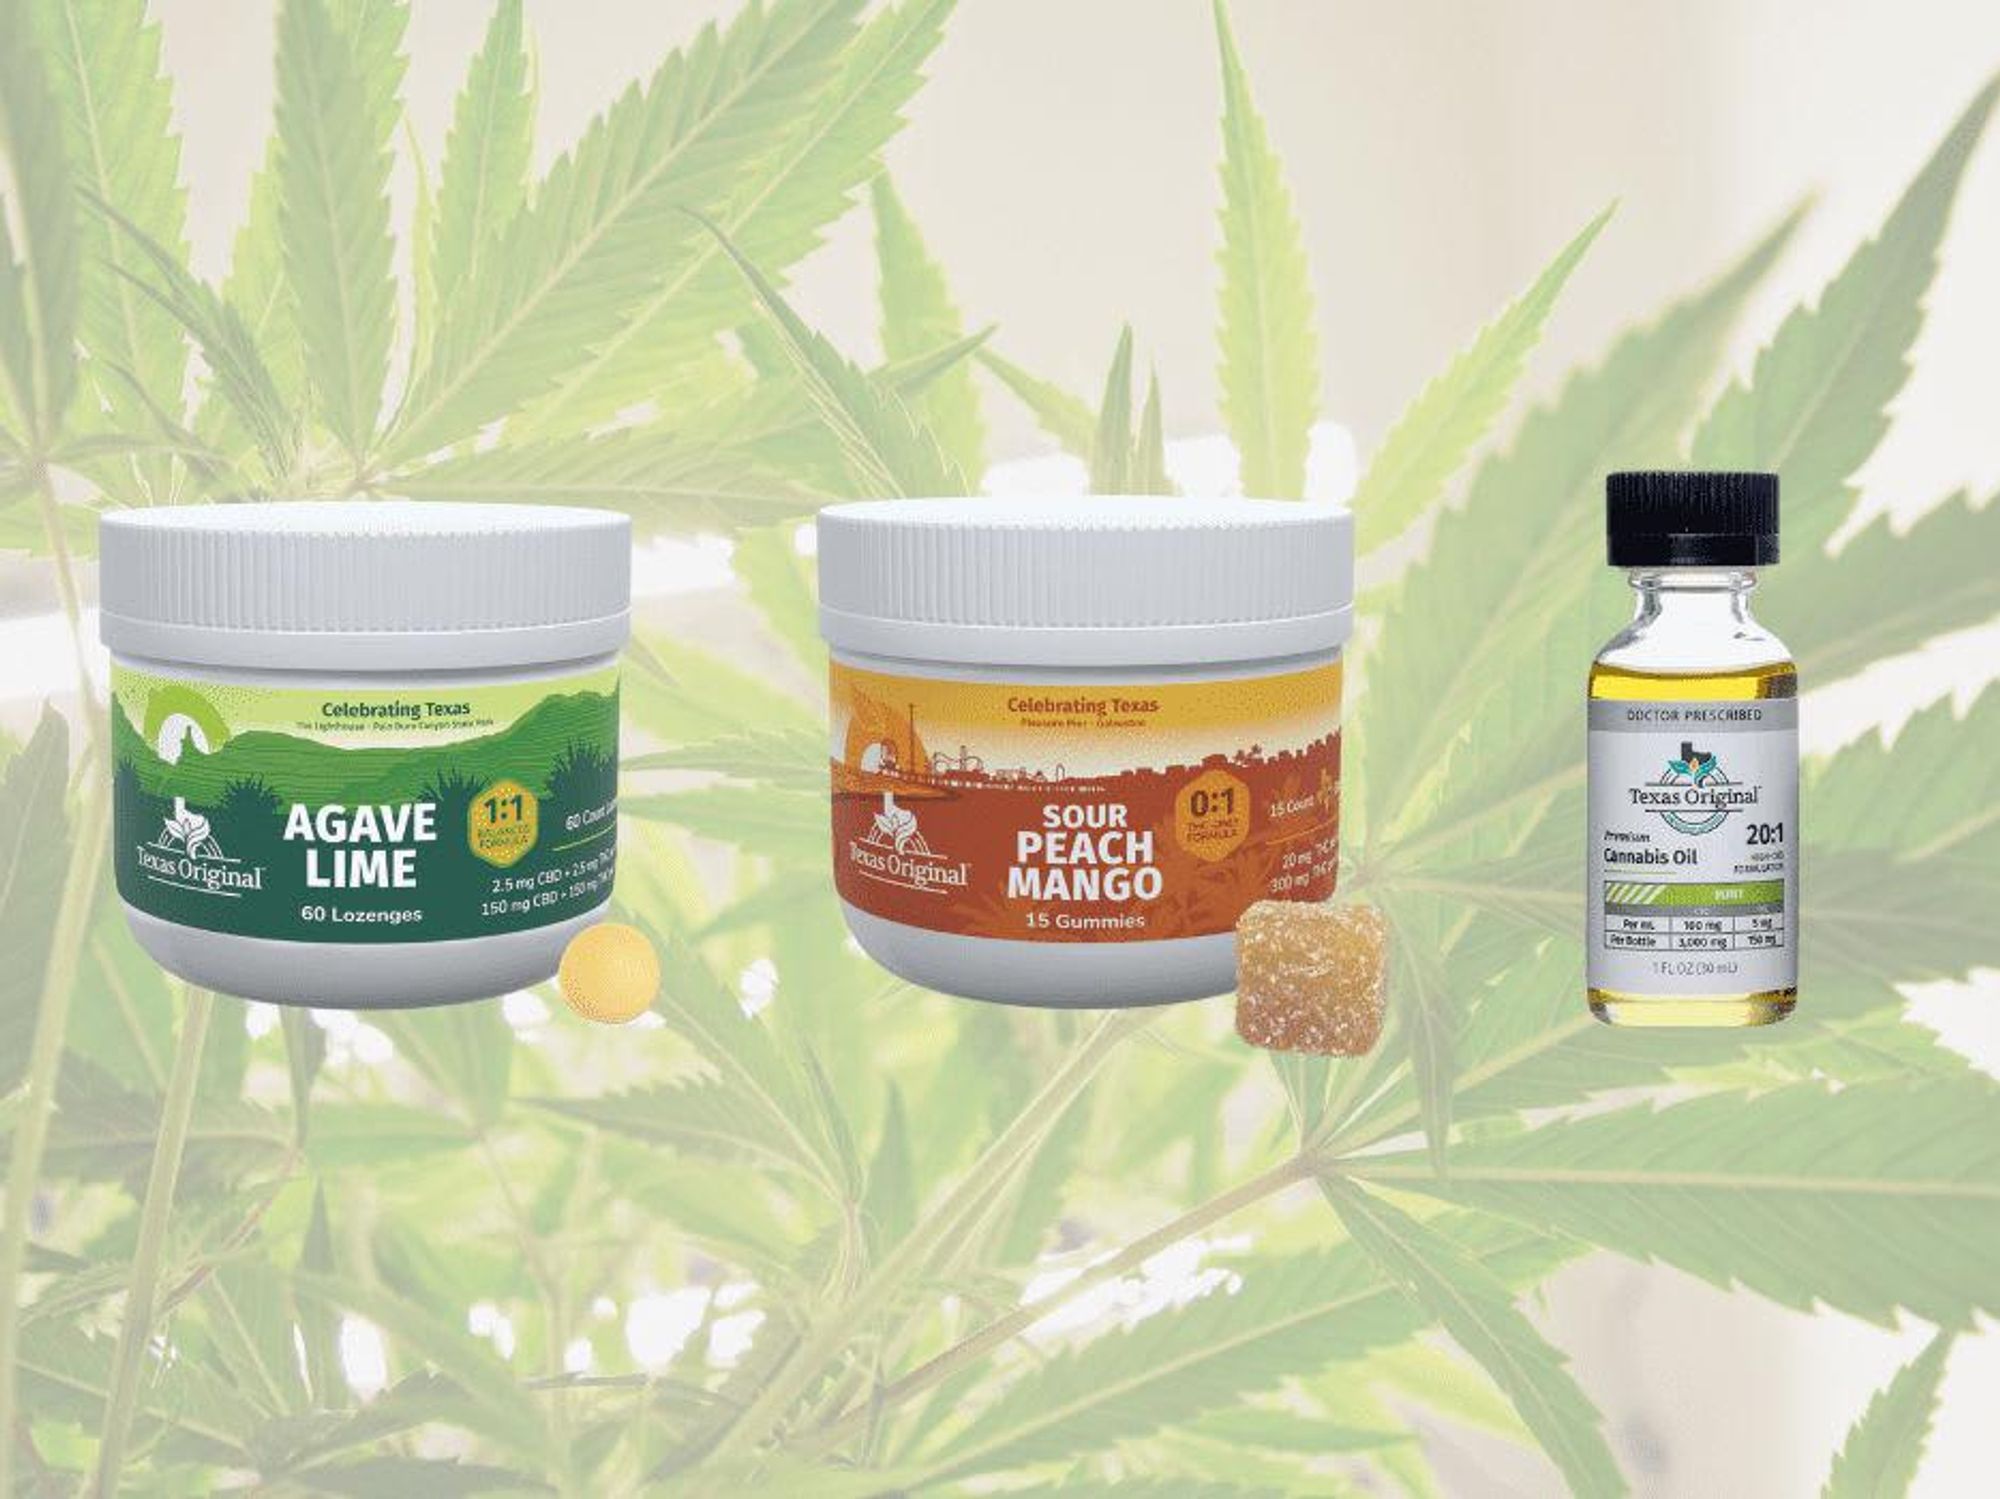 Texas Original offers a variety of products and doses for patients, including a 20 mg THC-only gummy with fast-acting nanoemulsion technology to give patients quicker onset times.